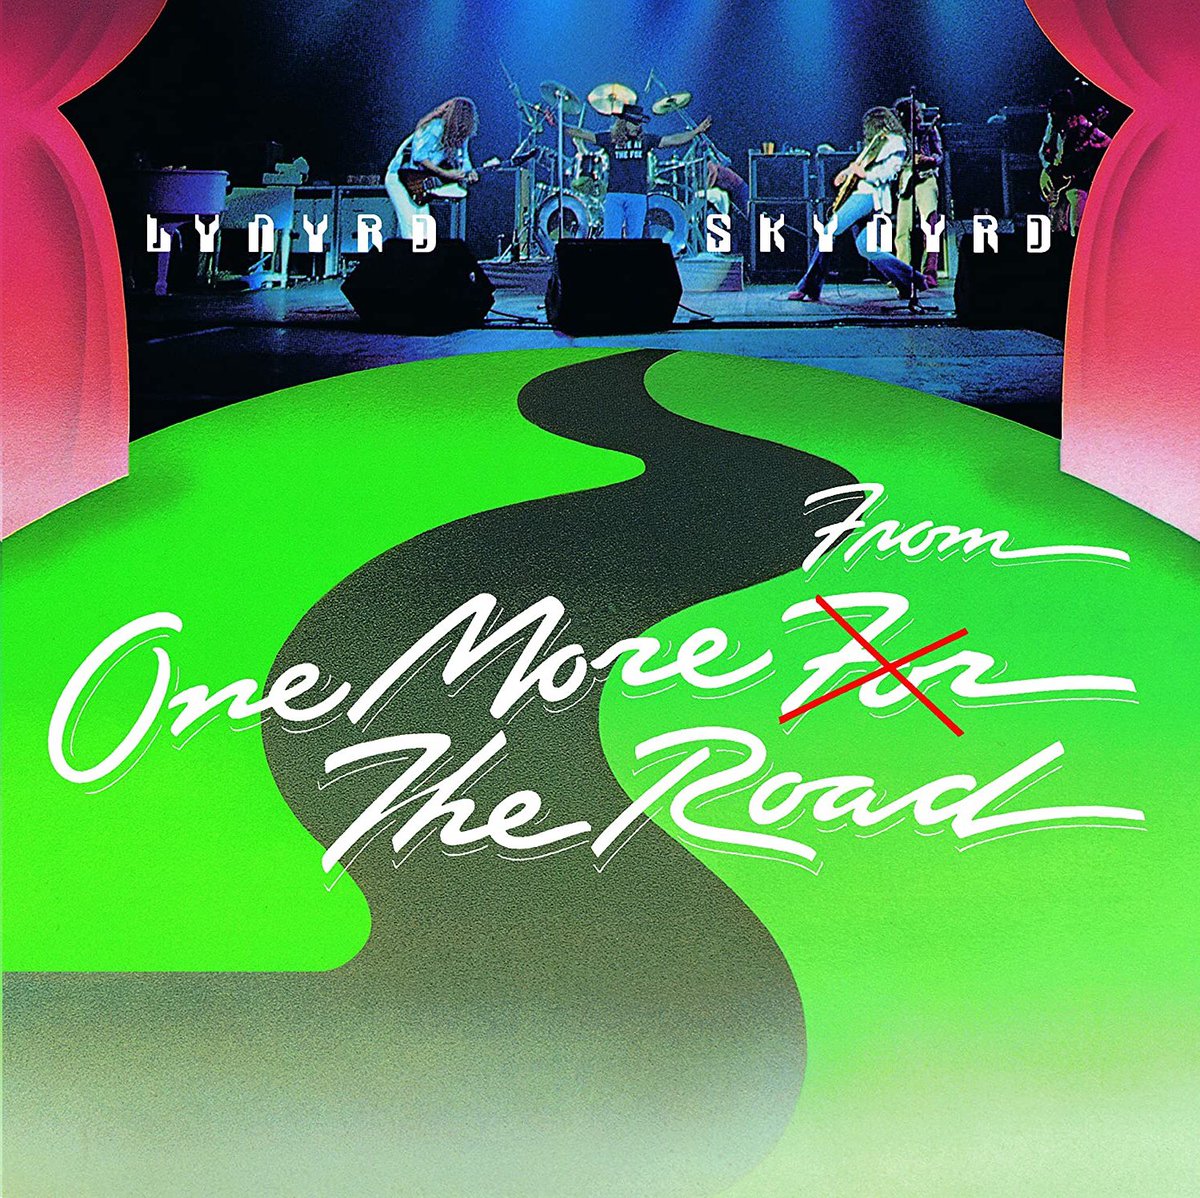 #Nowplaying Sweet Home Alabama - Lynyrd Skynyrd (One More From The Road [Live] [Disc 2])

#HBD #RonnieVanZant

 m.youtube.com/results?q=Swee…